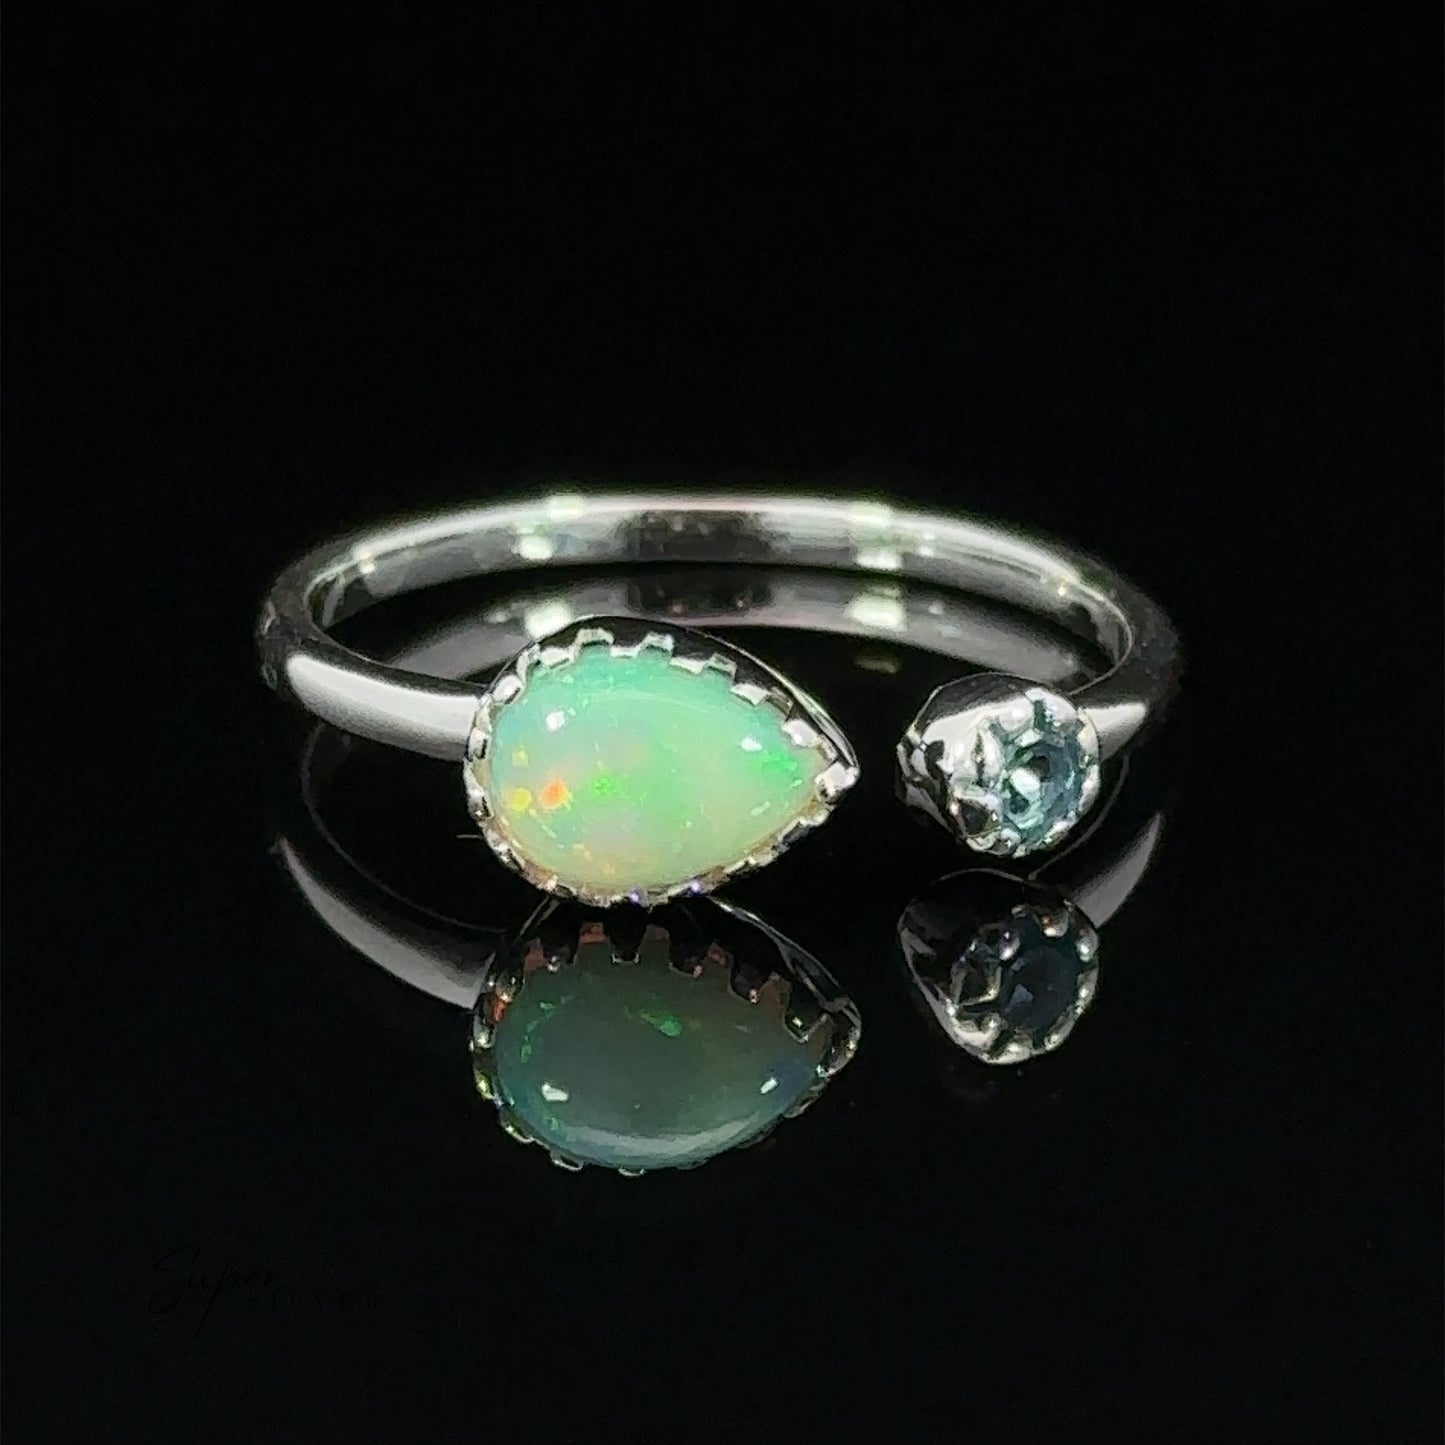 
                  
                    Dainty Adjustable Gemstone Ring with Two Stones with a pear-shaped opal set alongside a small round diamond, displayed against a black background.
                  
                